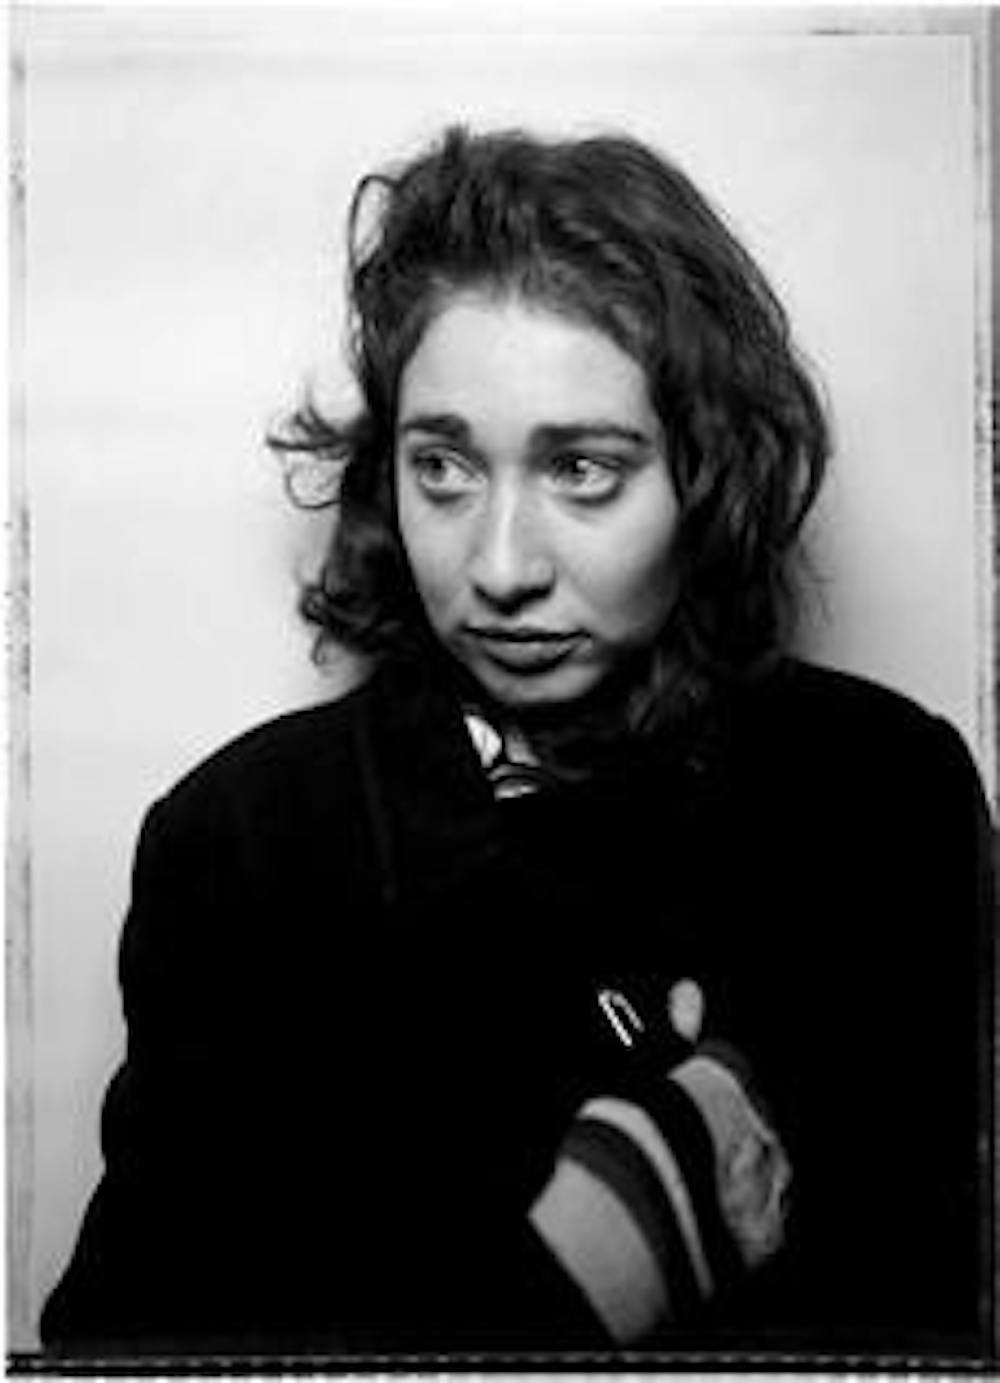 Songstress Regina Spektor relied mostly on her piano on Sunday.